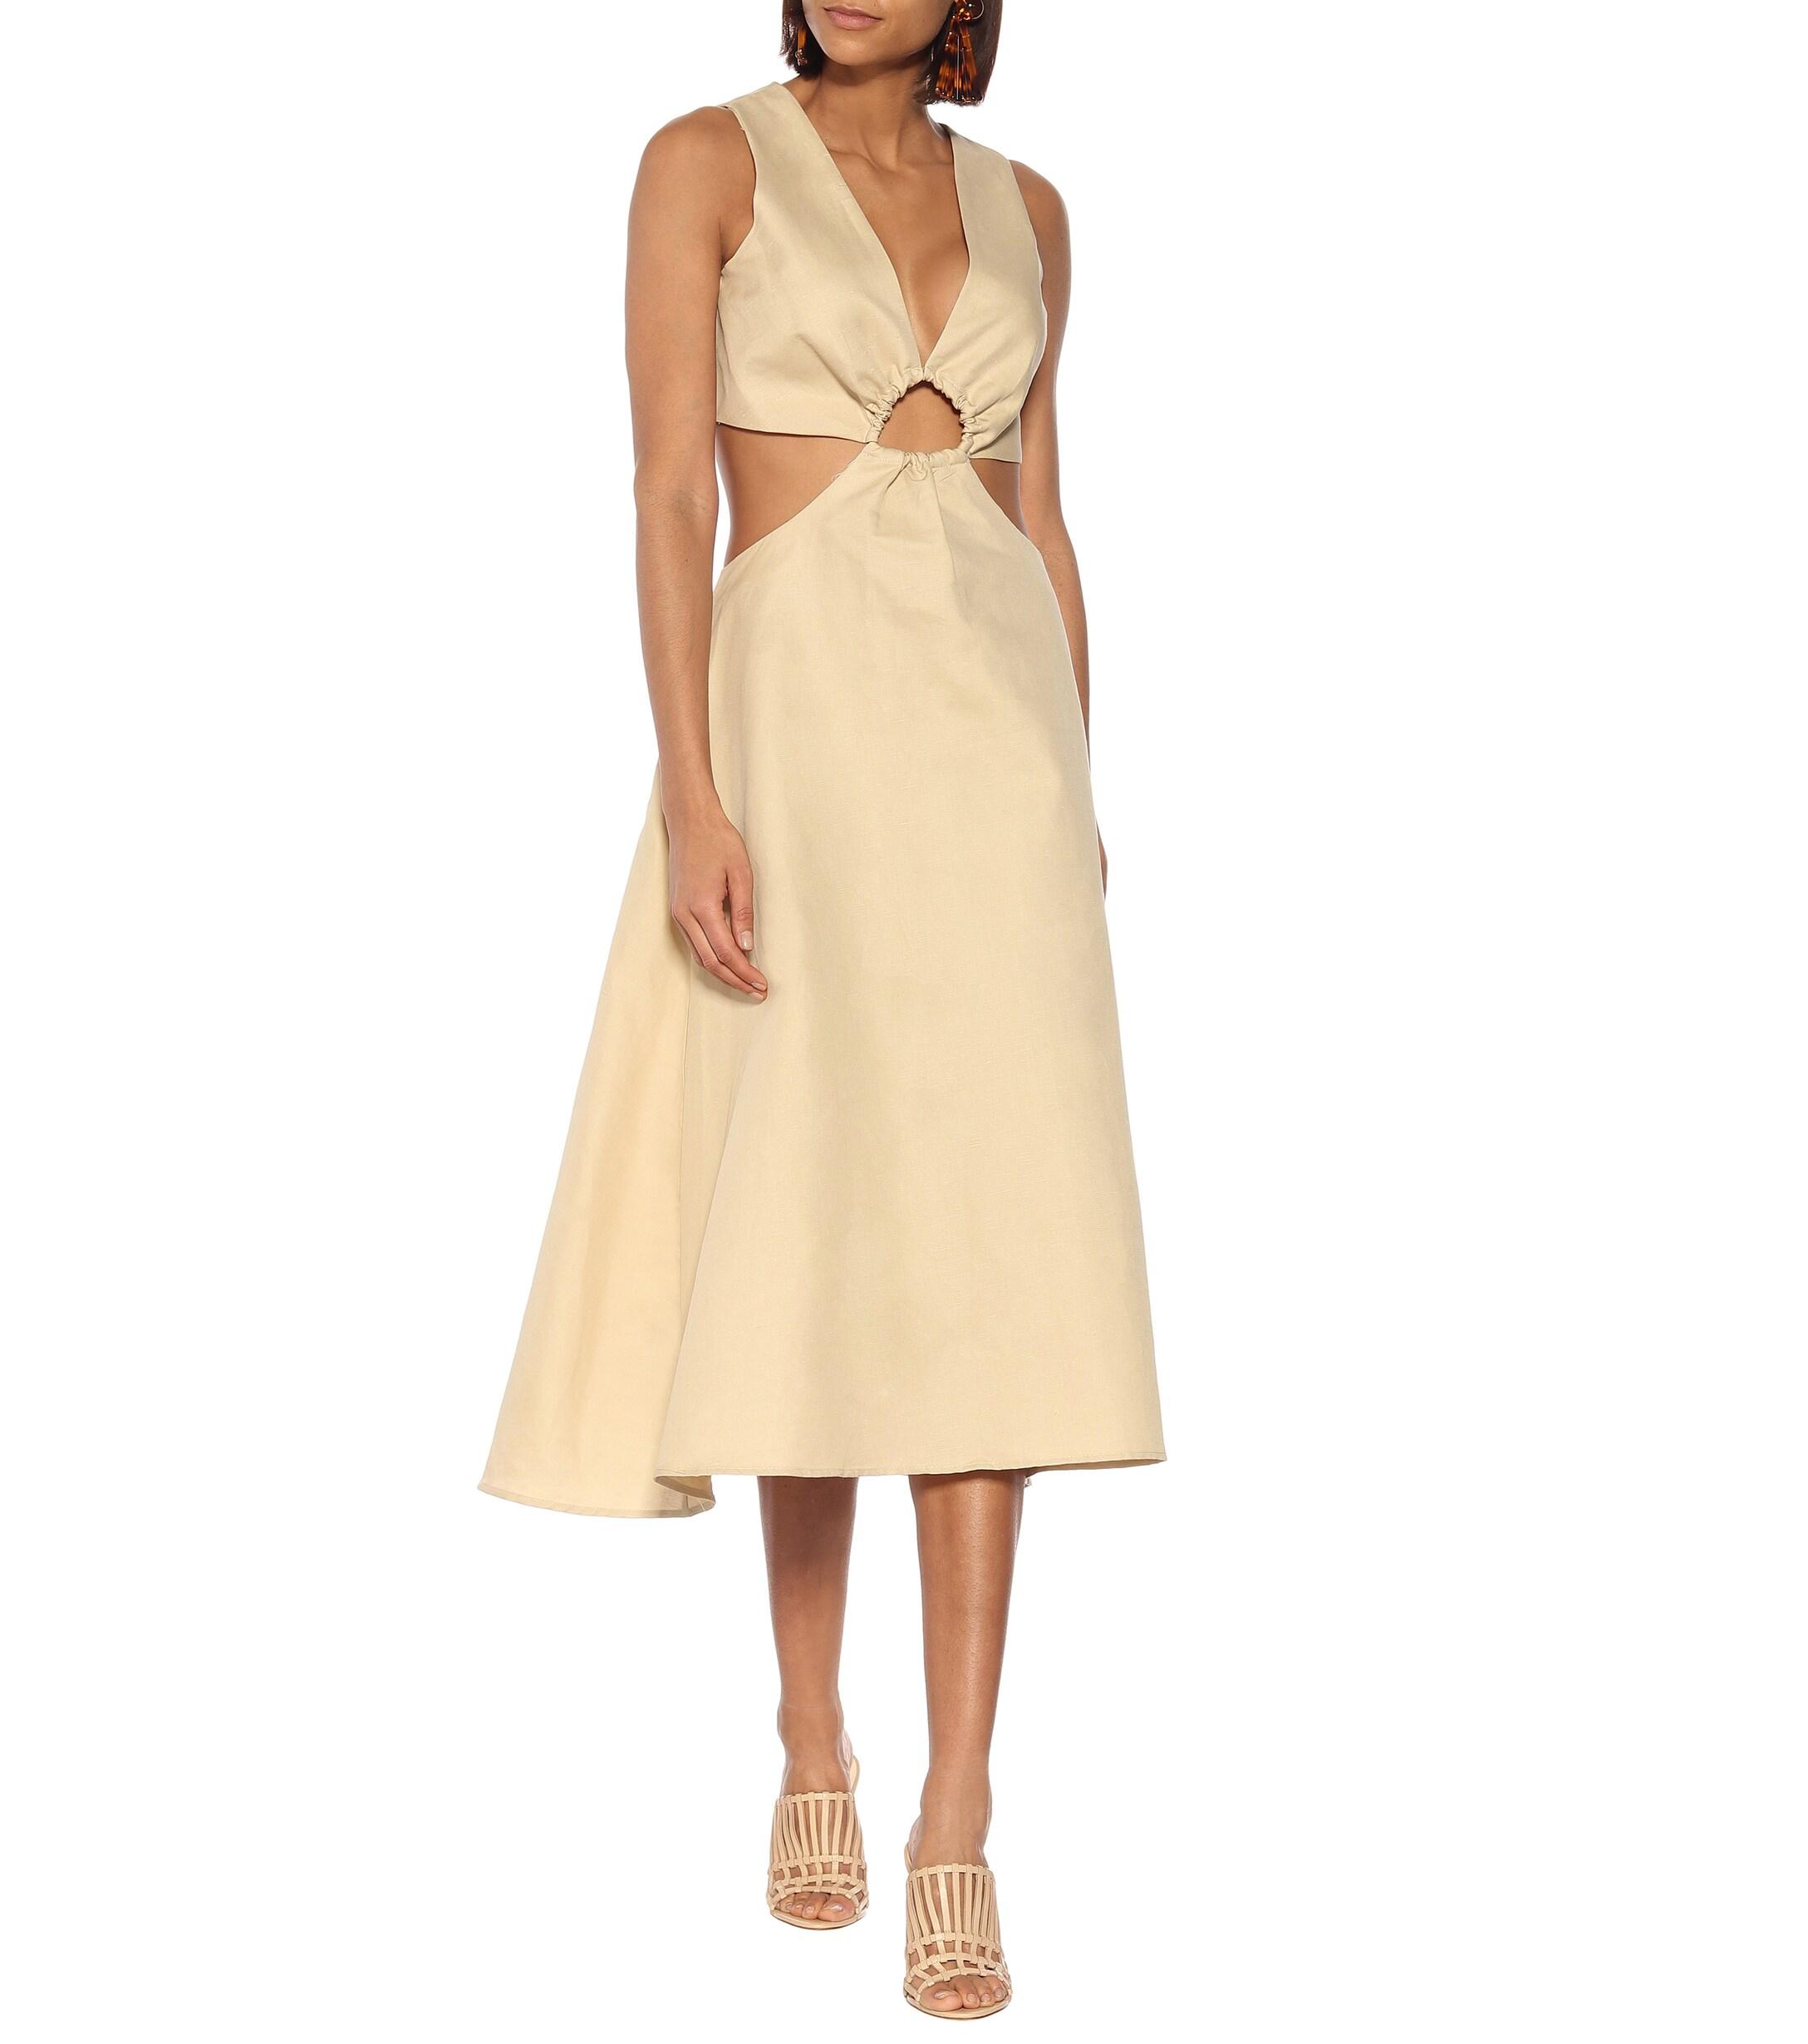 Cult Gaia Cybele Linen And Cotton Midi Dress in Beige (Natural) - Lyst